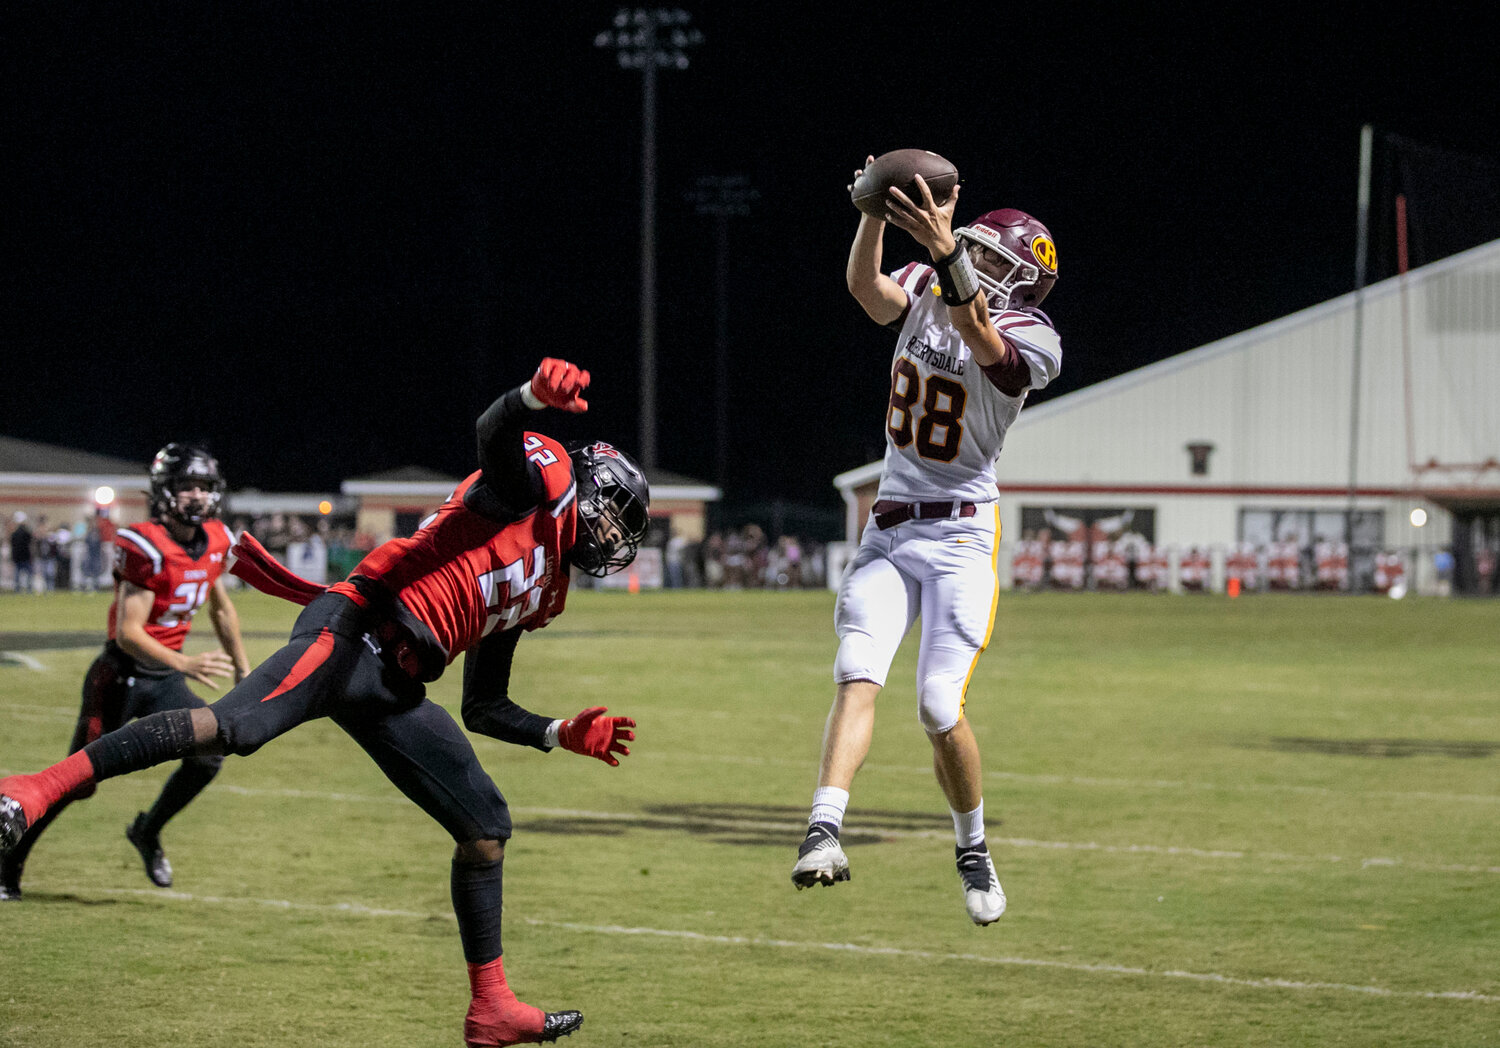 Robertsdale junior Bryson Gier makes a leaping catch near the sideline in the fourth quarter of the Golden Bears’ away region game against Spanish Fort Friday night. Grier followed up this 21-yard catch with a 30-yard reception to help Robertsdale rally on its final drive.